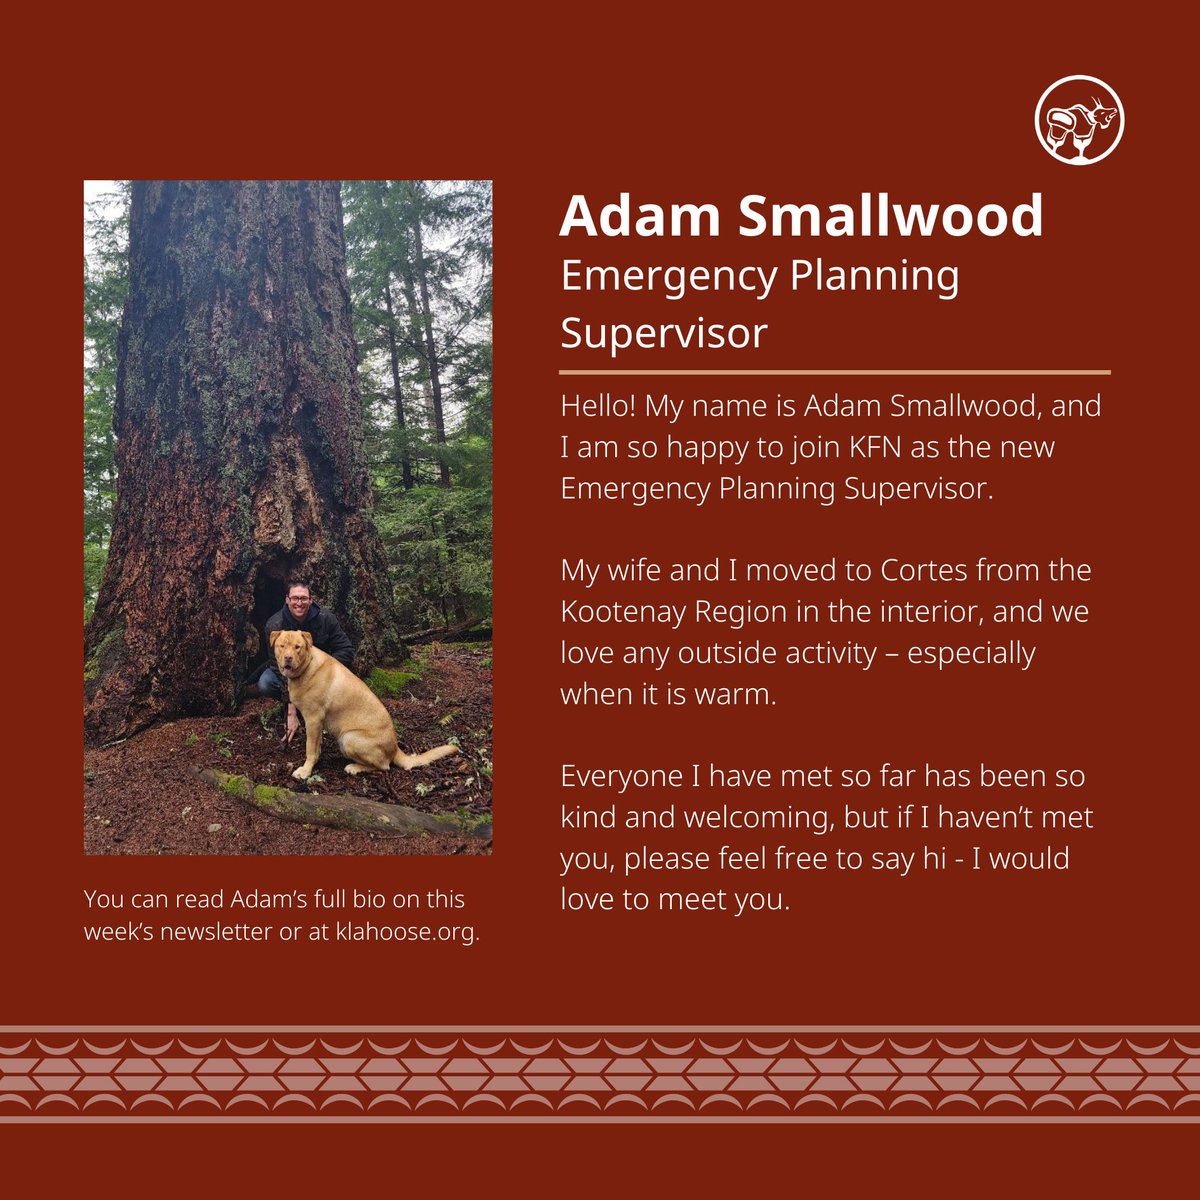 Welcome to the team, Adam!

You can read his full bio at klahoose.org/blog

Want to work at Klahoose, too? We post to our website -  klahoose.org/jobpostings as well as Indeed and LinkedIn.

#KlahooseFirstNation #JobPostings #BCJobs #WelcometoKlahoose